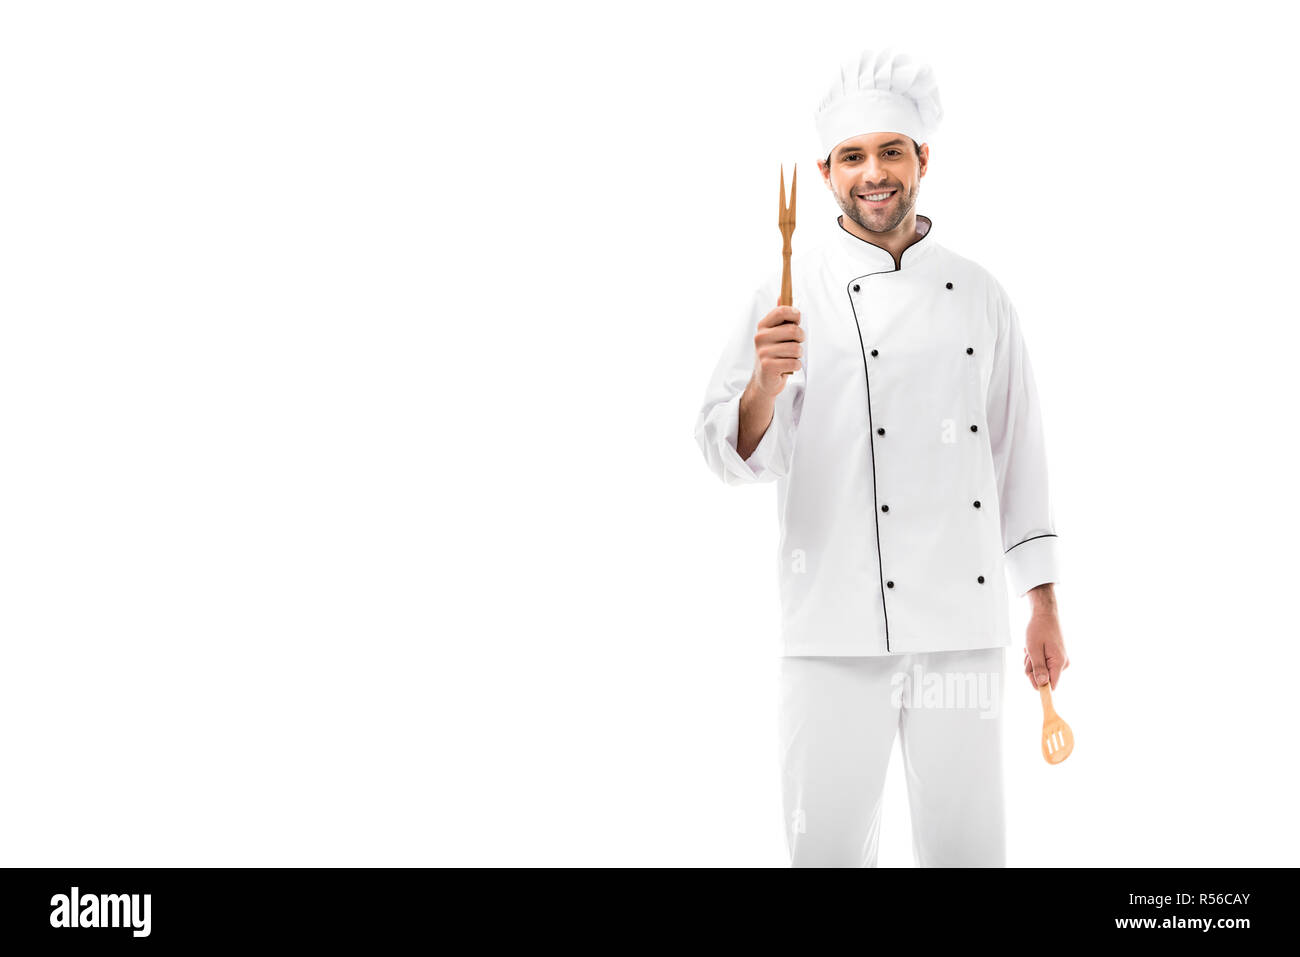 https://c8.alamy.com/comp/R56CAY/happy-young-chef-holding-kitchen-utensils-and-looking-at-camera-isolated-on-white-R56CAY.jpg